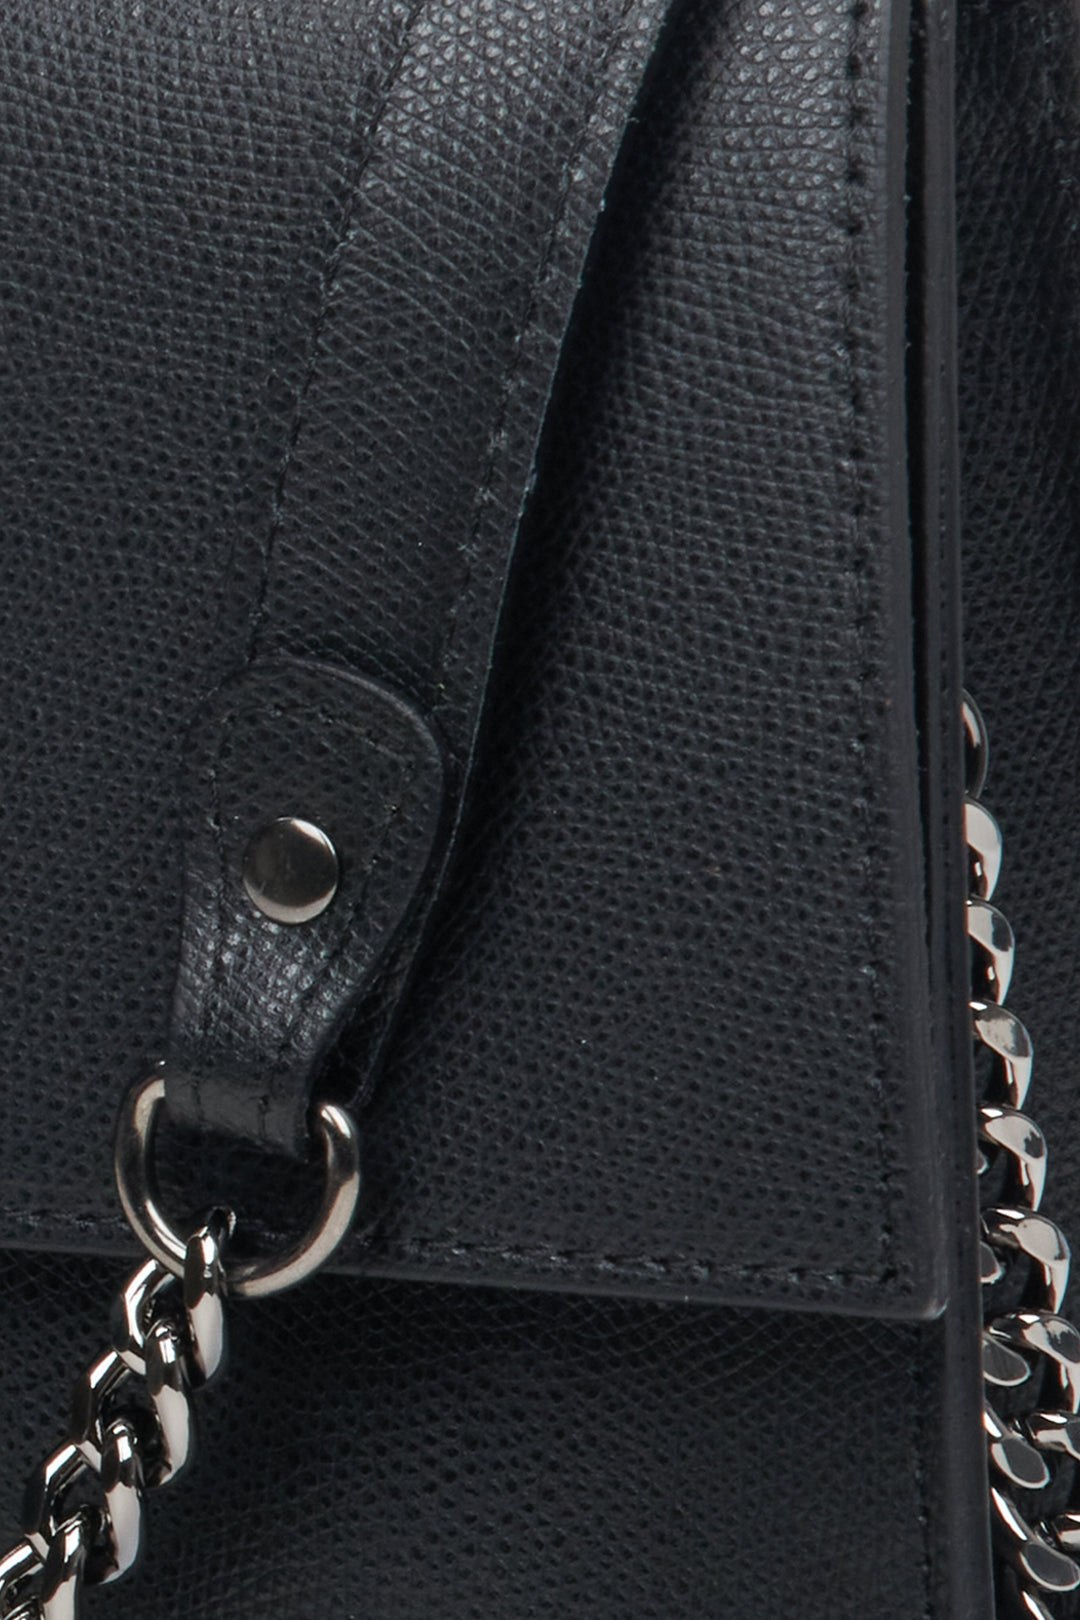 Women's black leather handbag with a flap by Estro - close-up on the details.